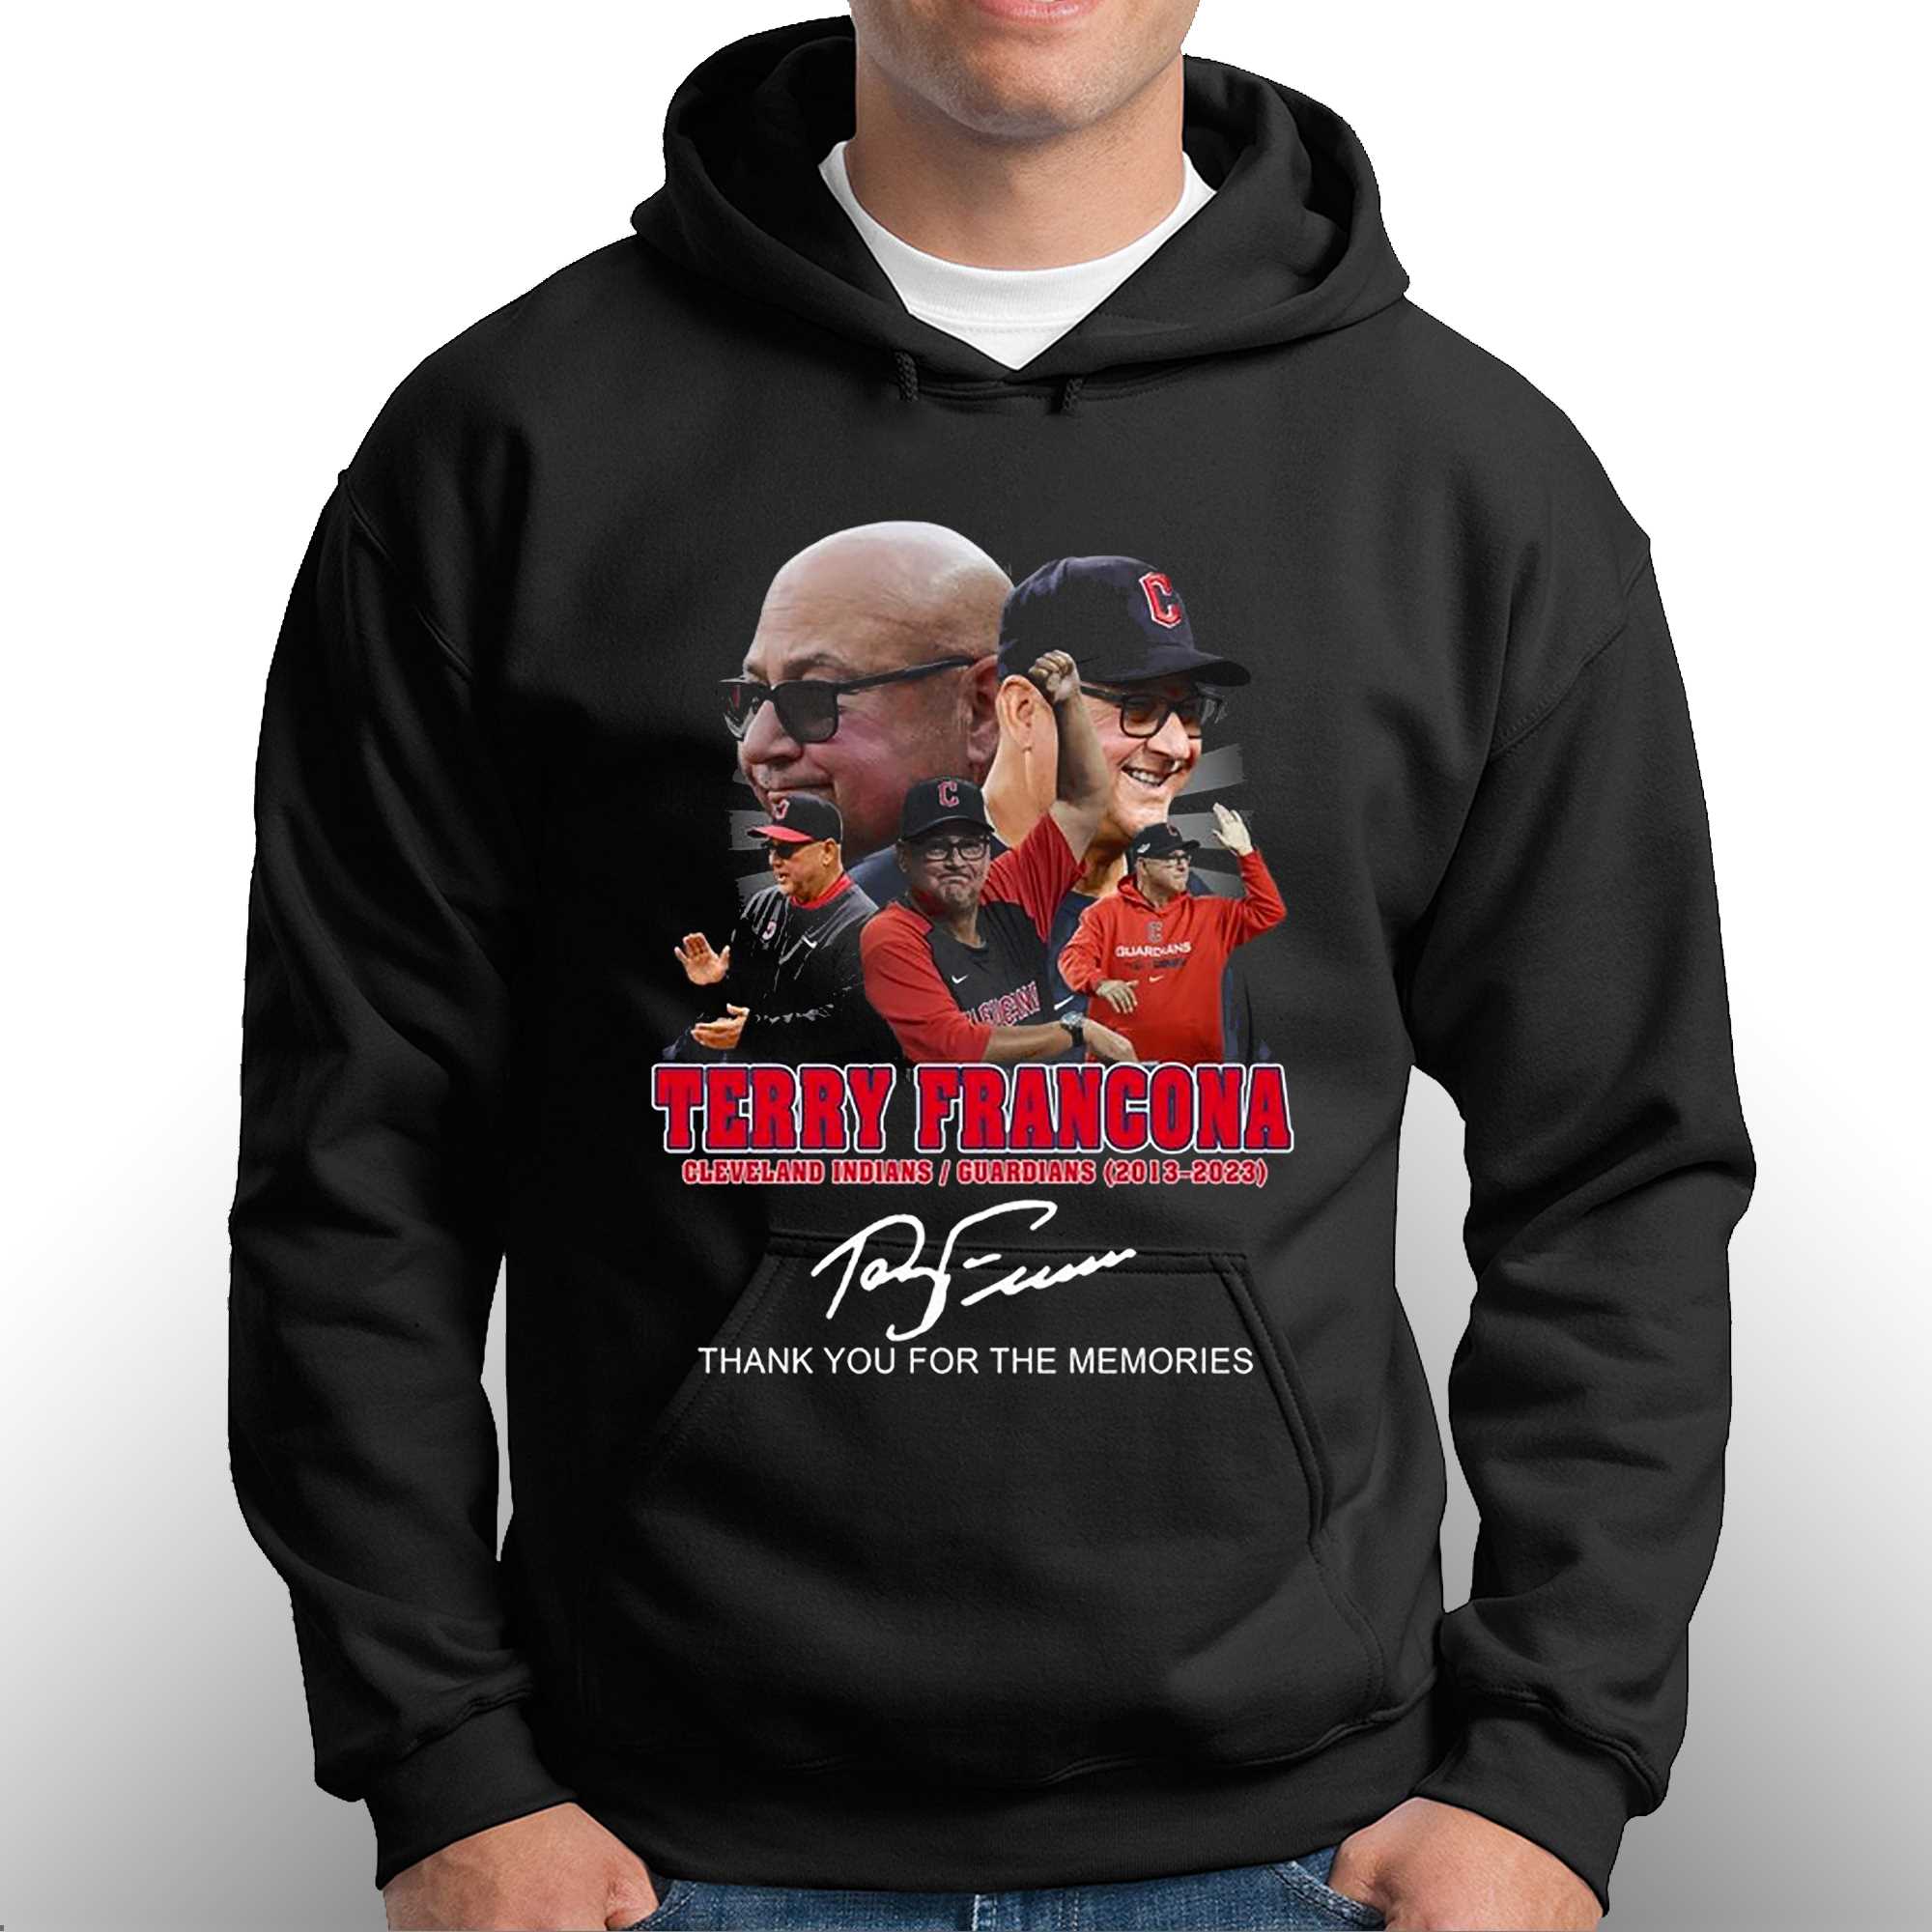 Thank You Terry Francona Cleveland Guardians 2013-2023 Signature Shirt,  hoodie, sweater and long sleeve